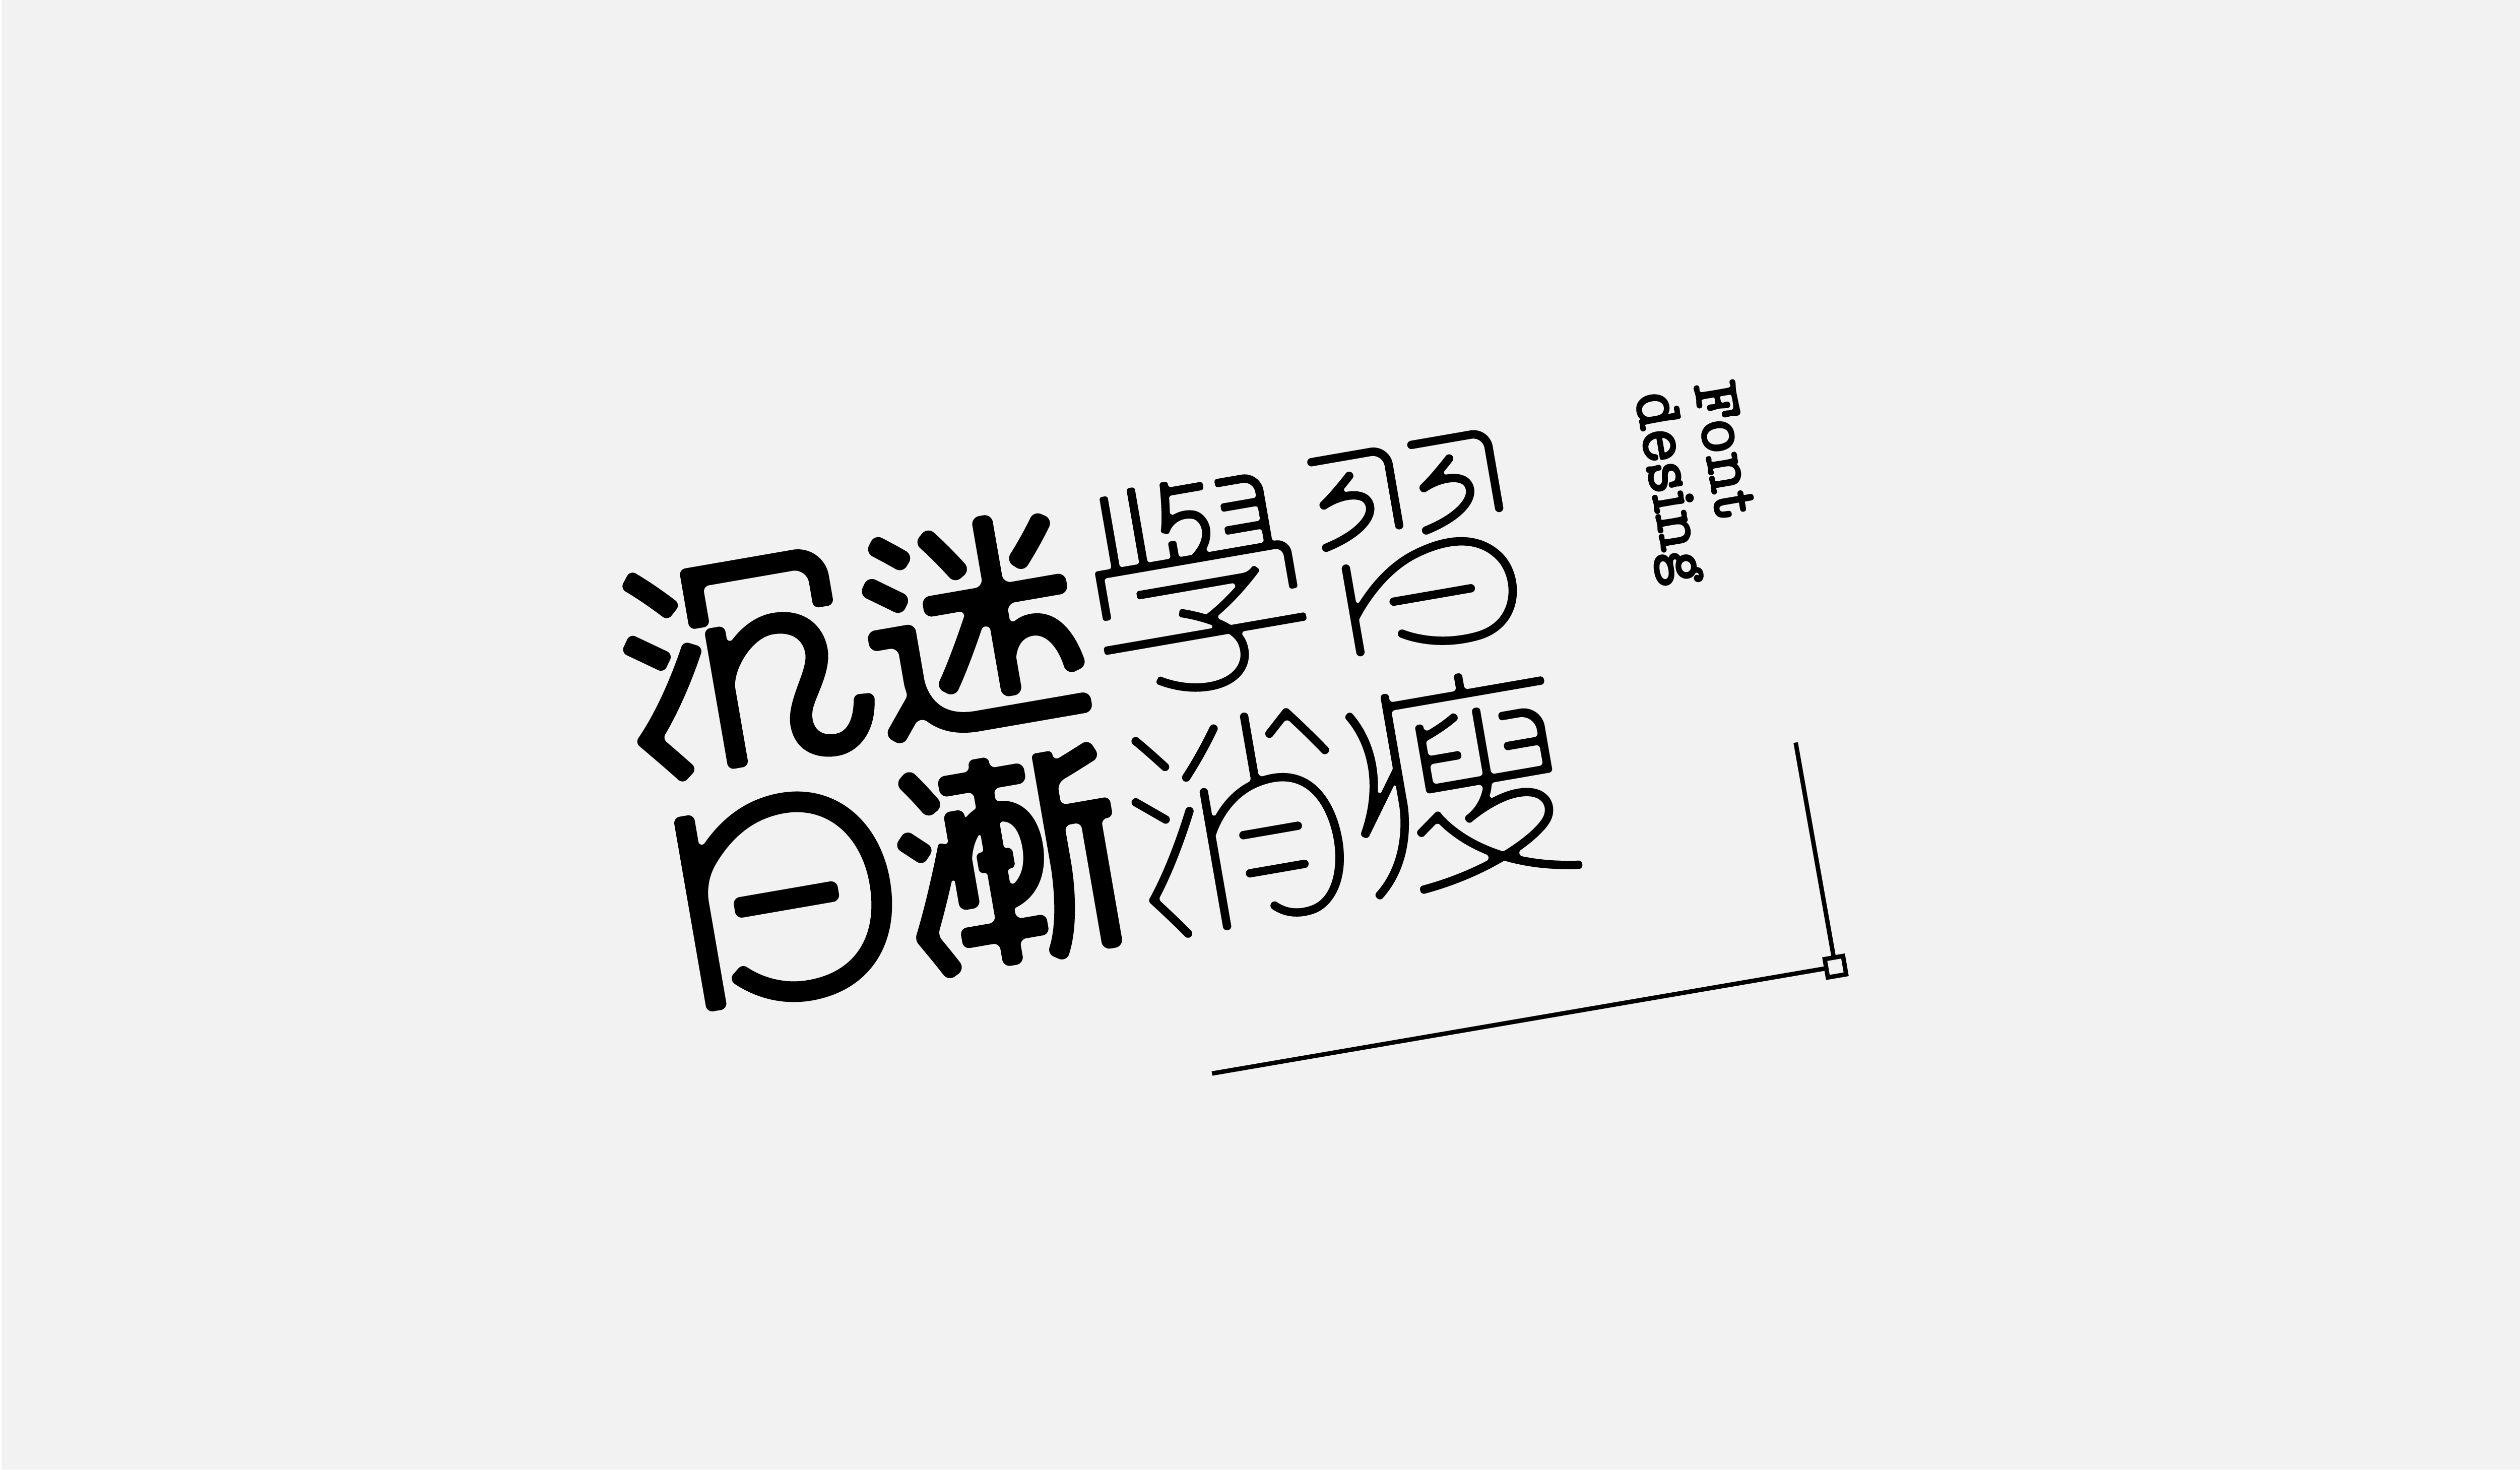 30P Collection of the latest Chinese font design schemes in 2021 #.91